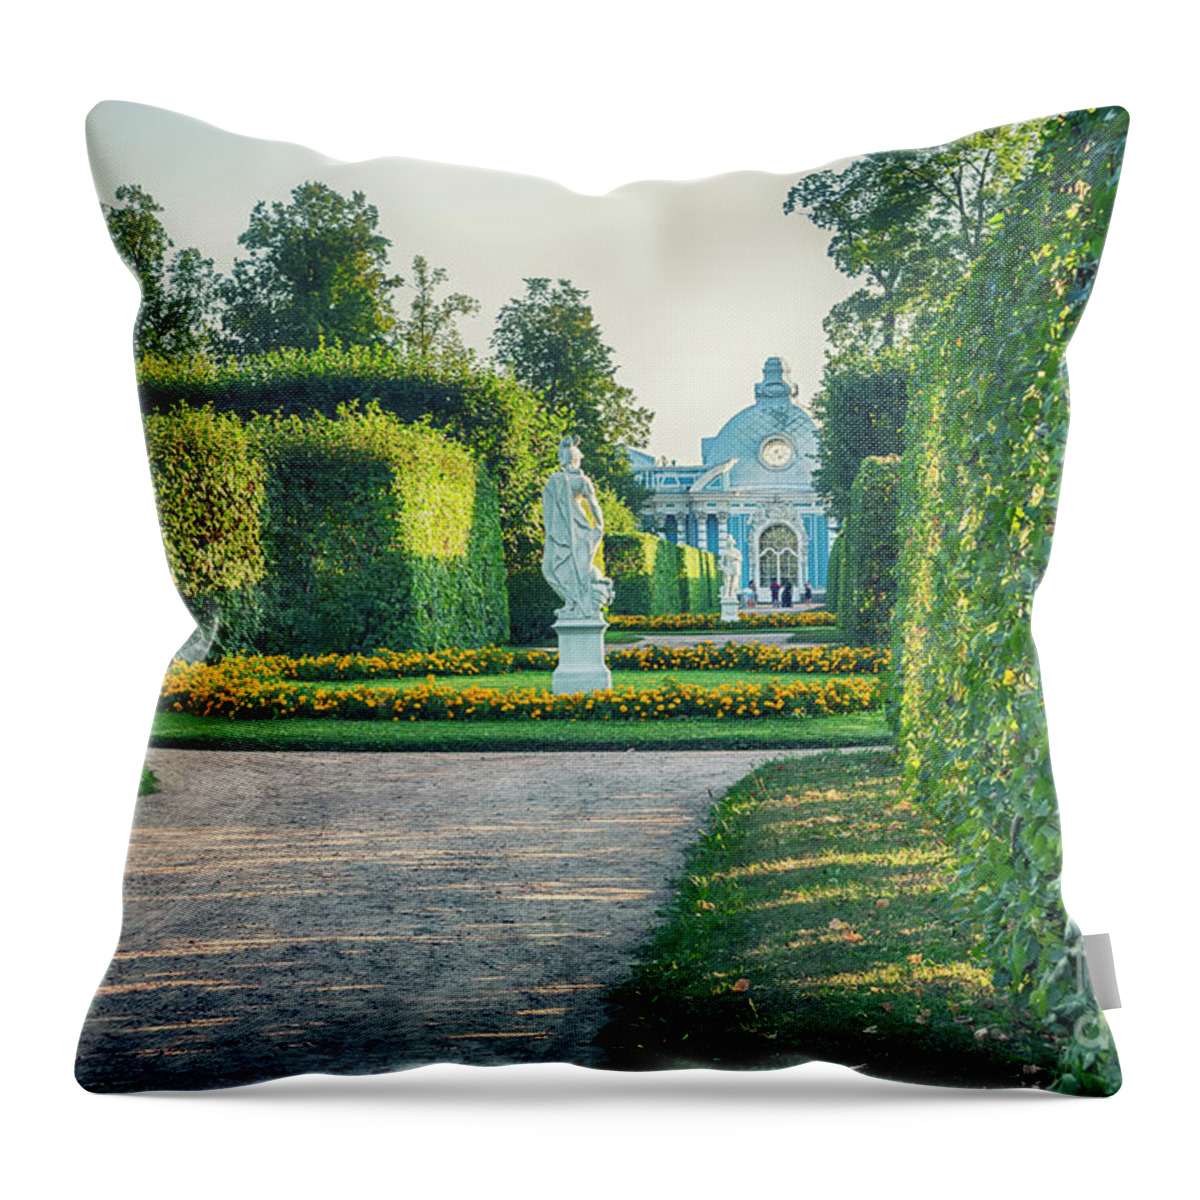 Old Throw Pillow featuring the photograph Evening In Classic Park by Ariadna De Raadt